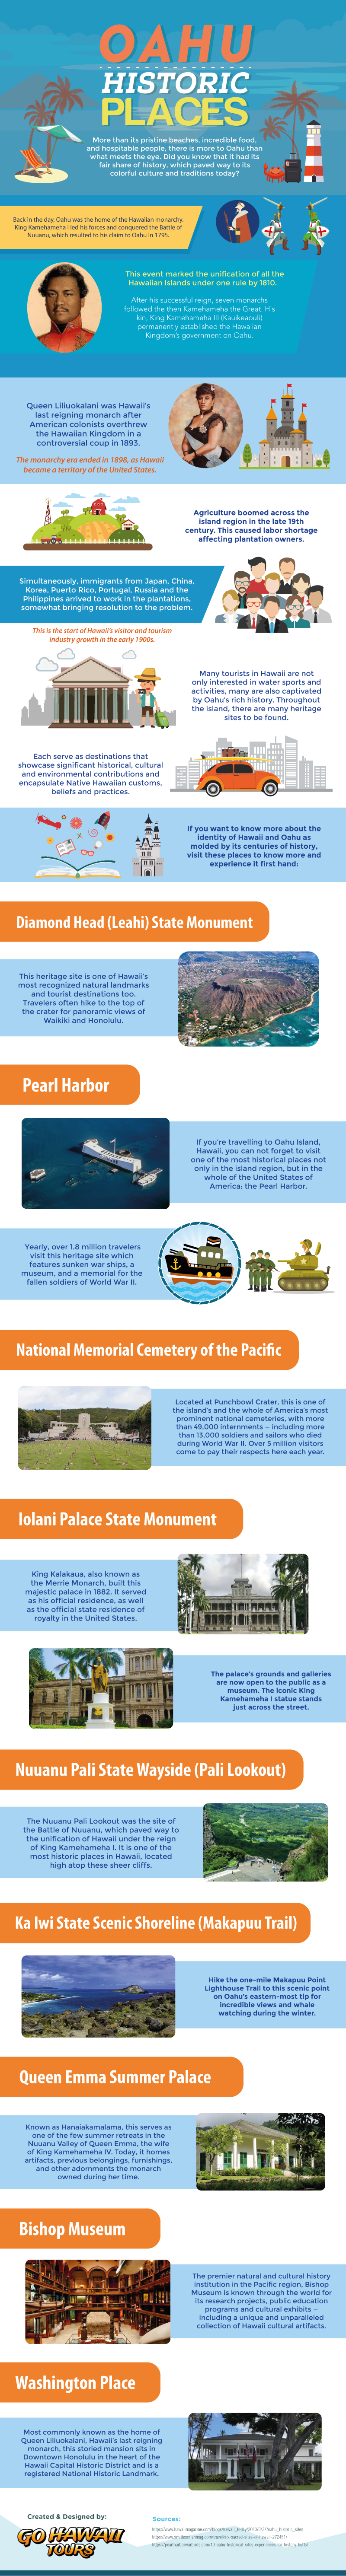 Oahu Historic Places Infographic Image